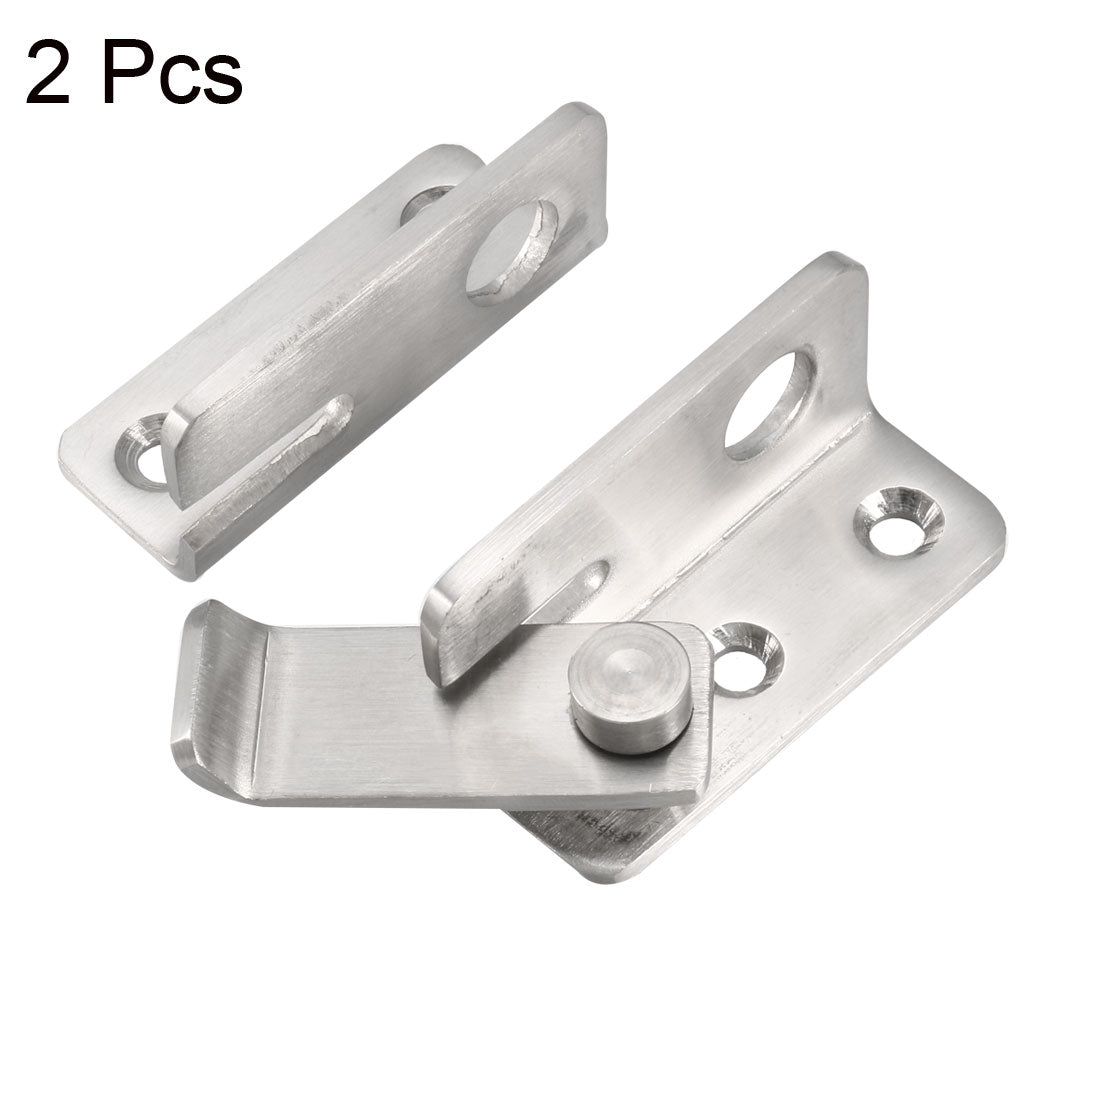 uxcell Uxcell Flip Door Latch 201 Stainless Steel 62x52mm Gate Latch Left Open Hasp Slide Lock with Padlock Hole 2 Pcs